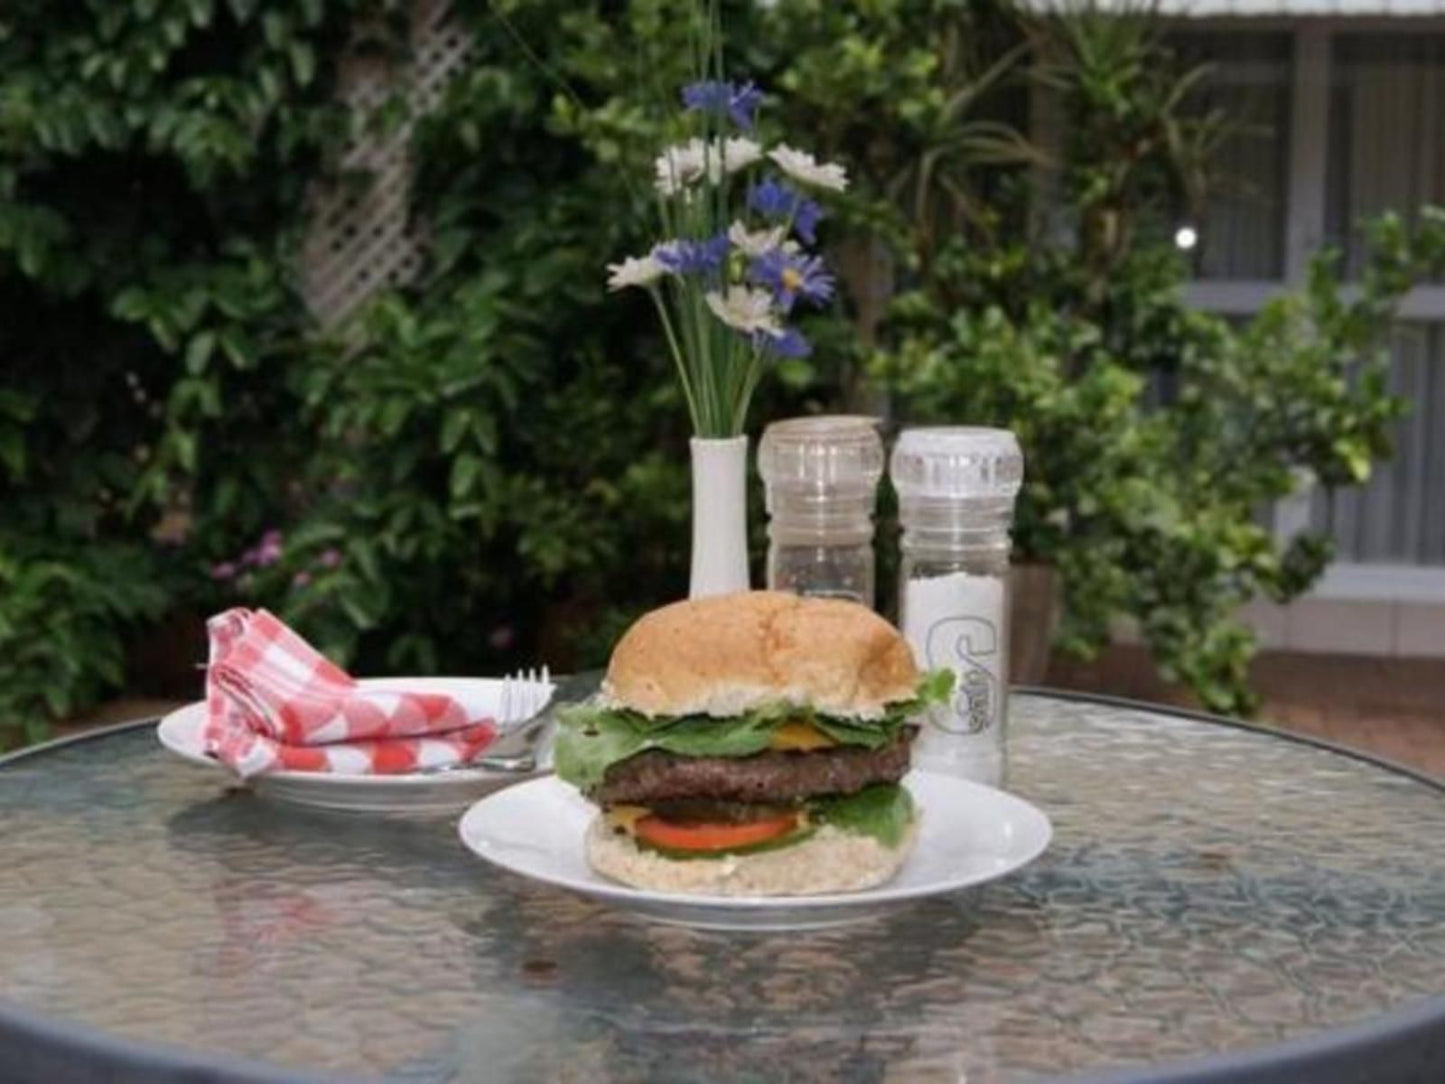 Sommersby Guest House Morningside Durban Kwazulu Natal South Africa Burger, Dish, Food, Bakery Product